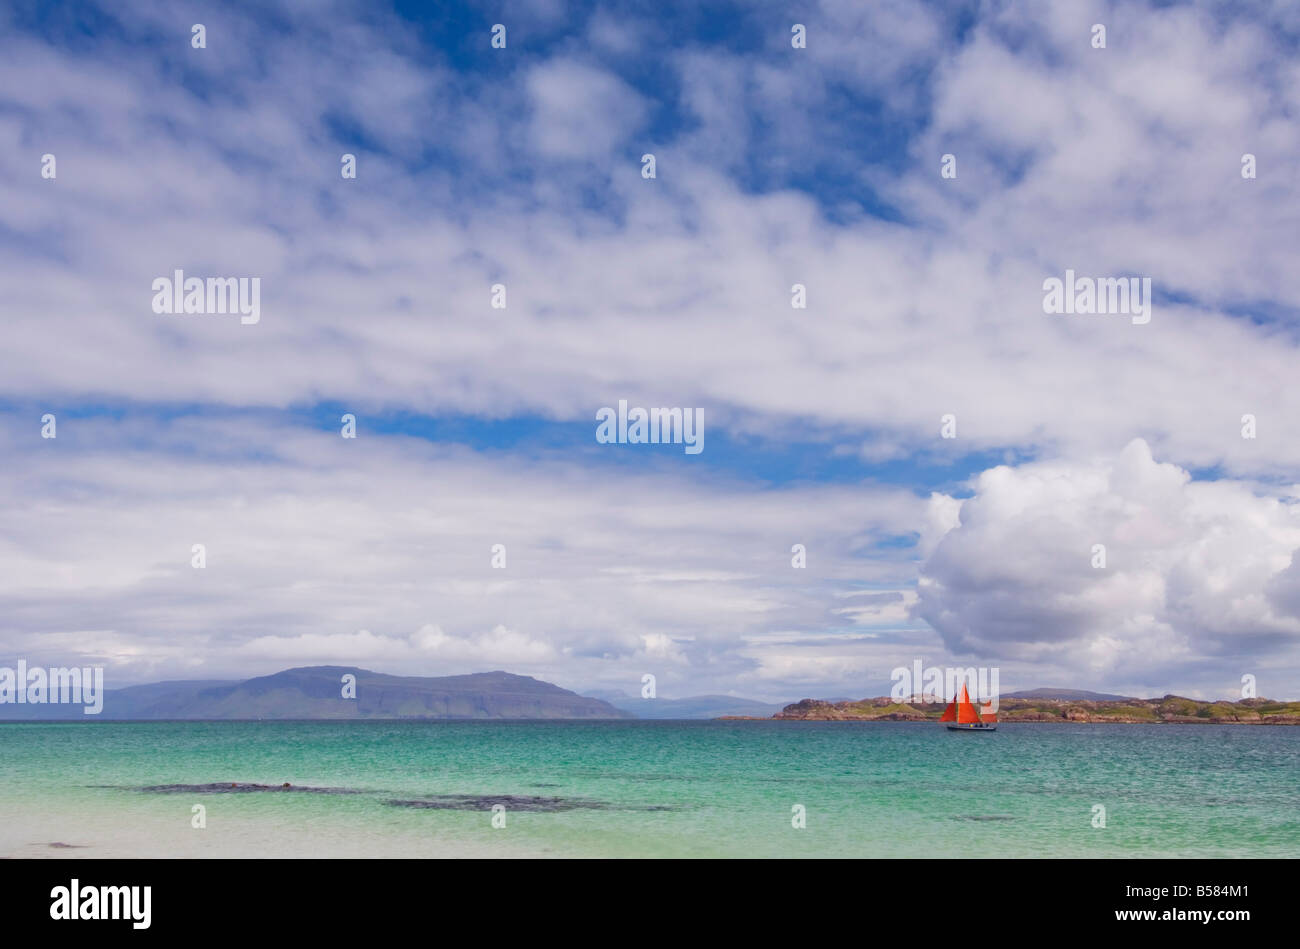 Boat with red sails off Traigh Bhan beach, Iona, Sound of Iona, Scotland, United Kingdom, Europe Stock Photo